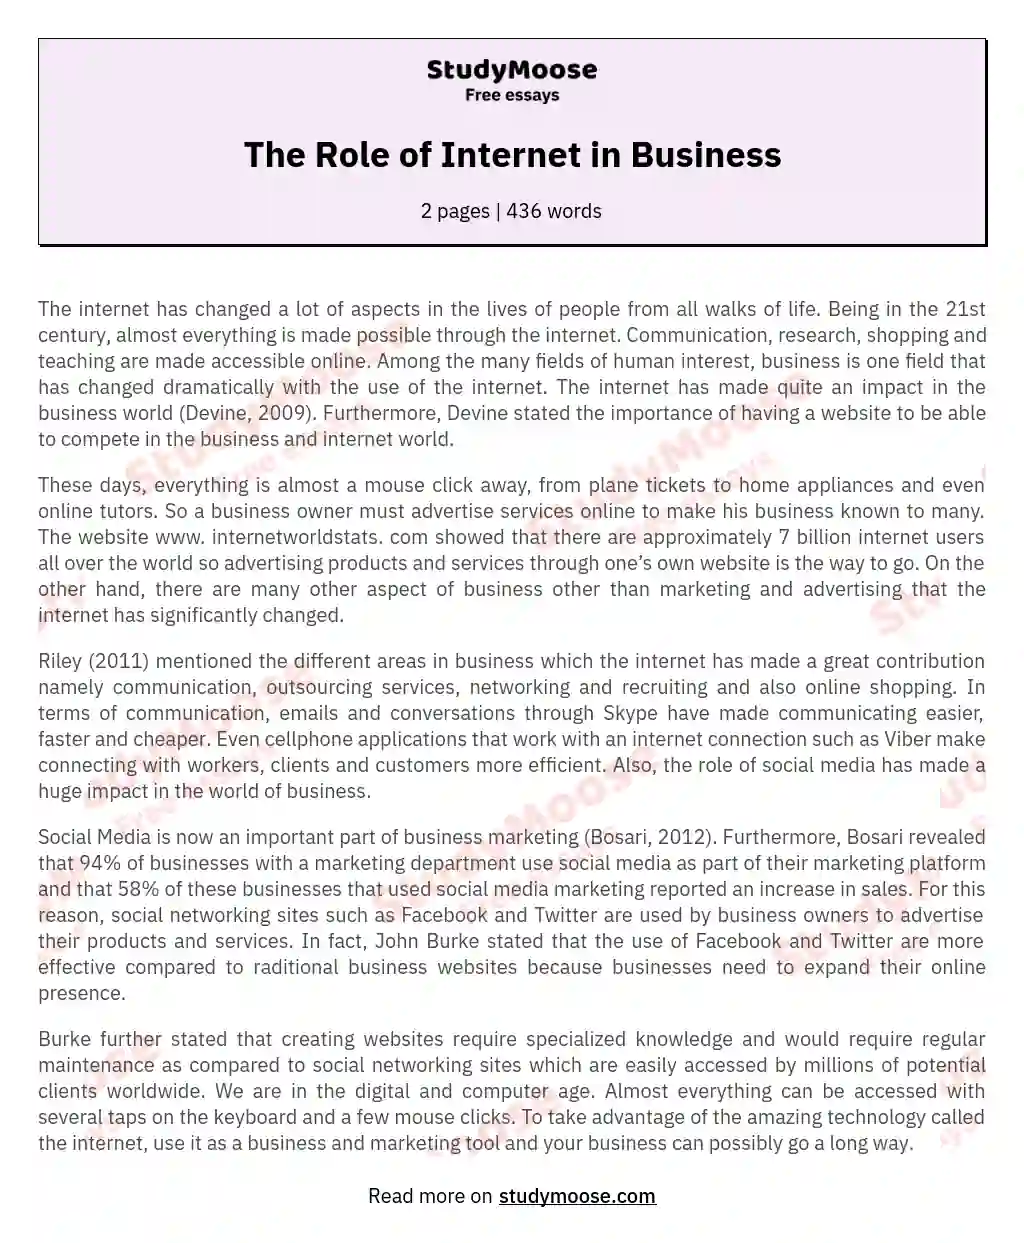 The Role of Internet in Business essay